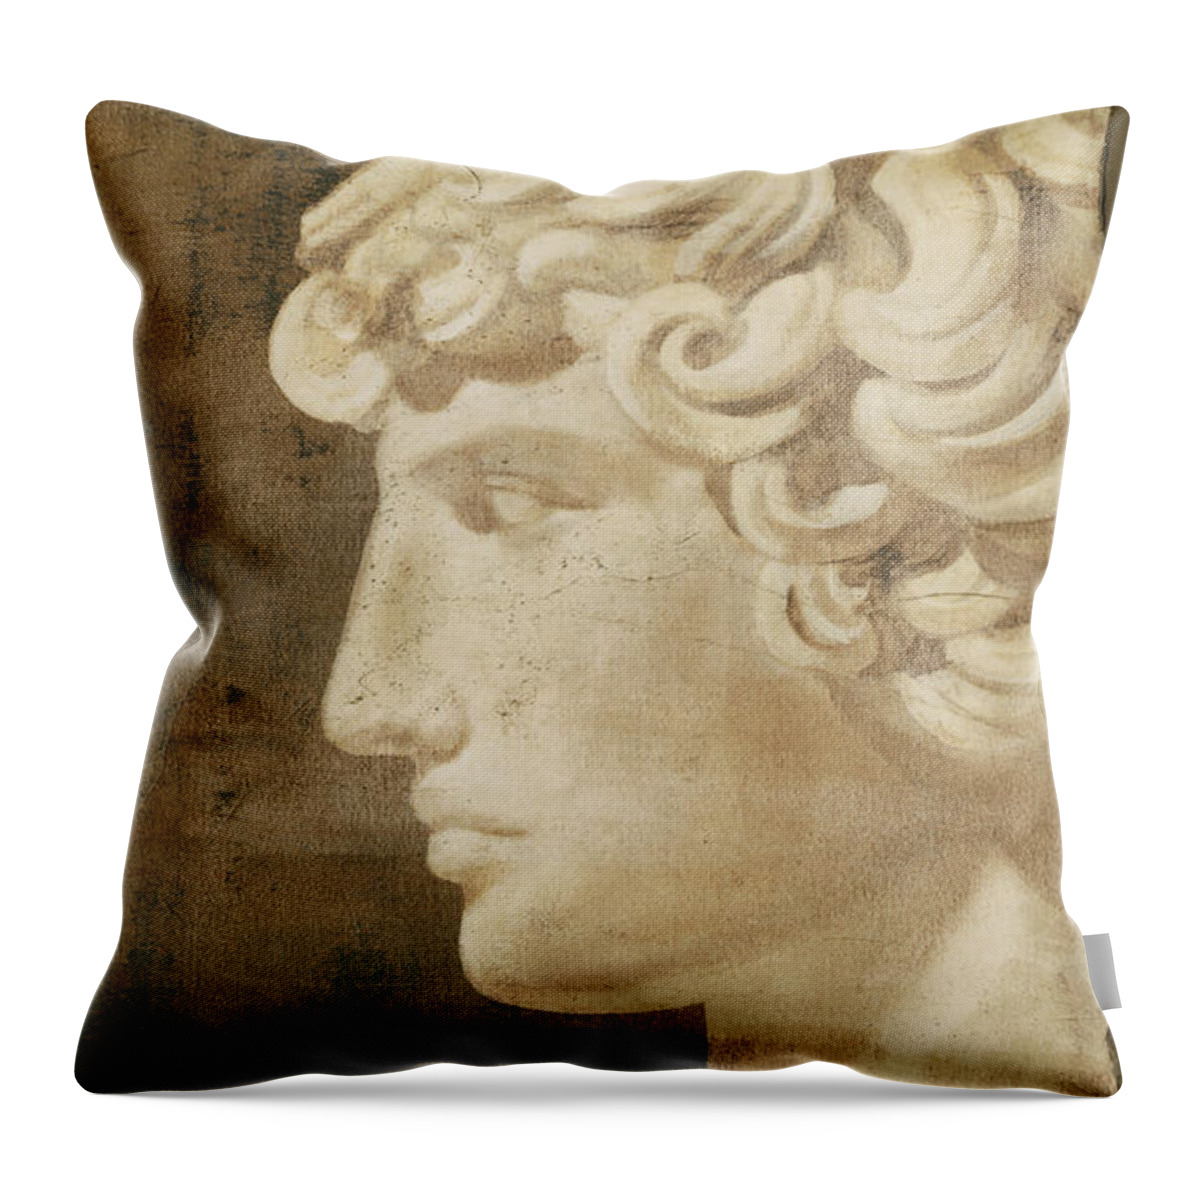 Decorative Throw Pillow featuring the painting Mythological Artifact II by Ethan Harper